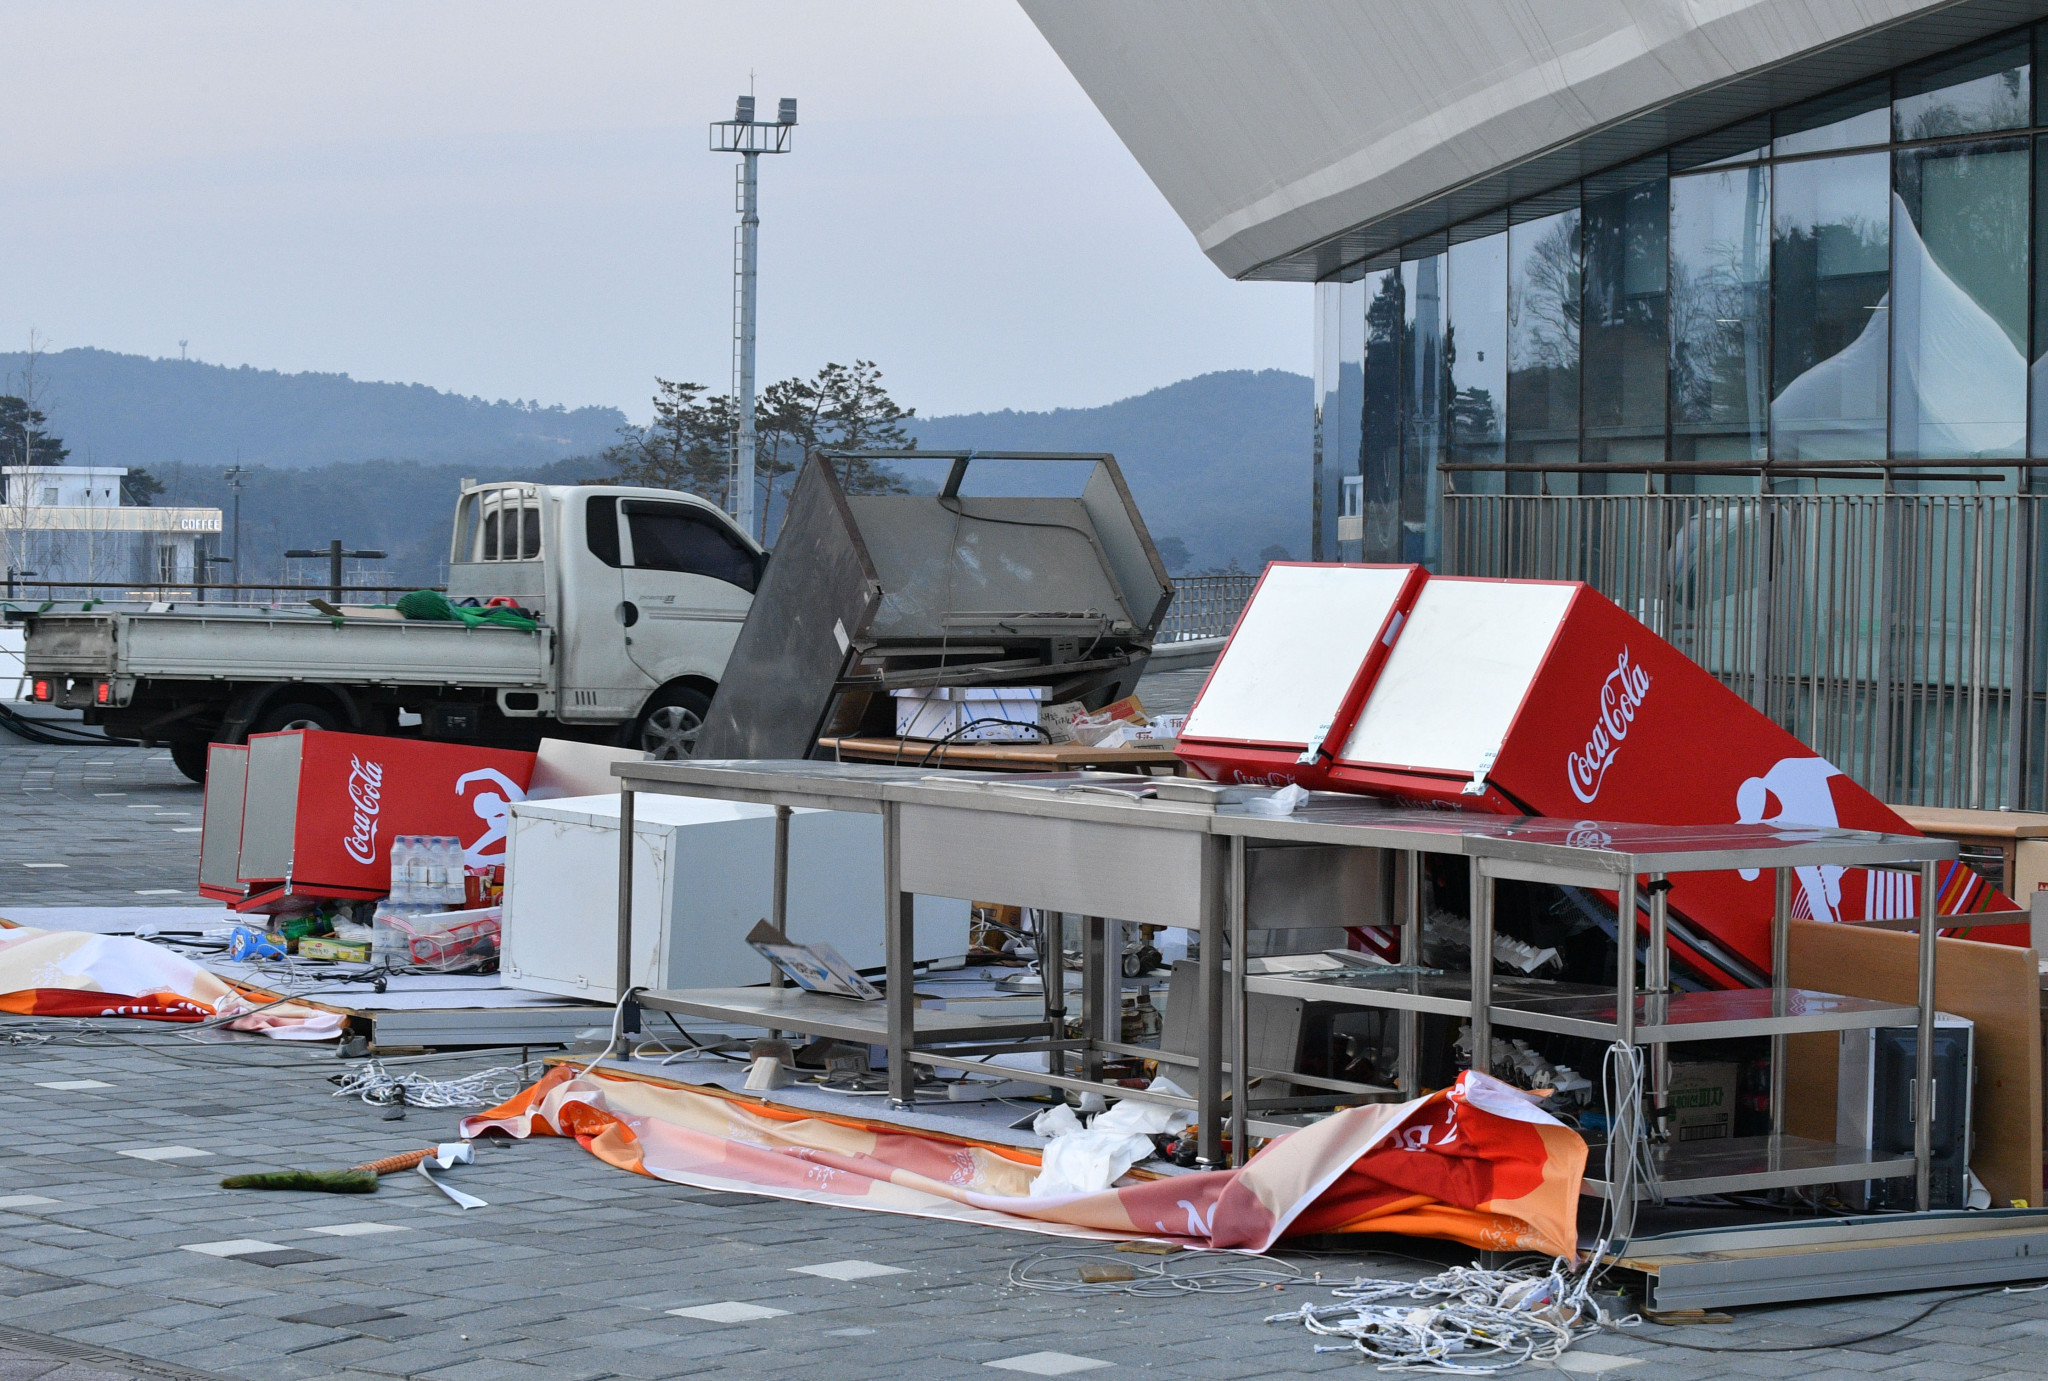 Temporary structures at the Olympic Park in Gangneung were among facilities damaged by the strong winds ©Getty Images